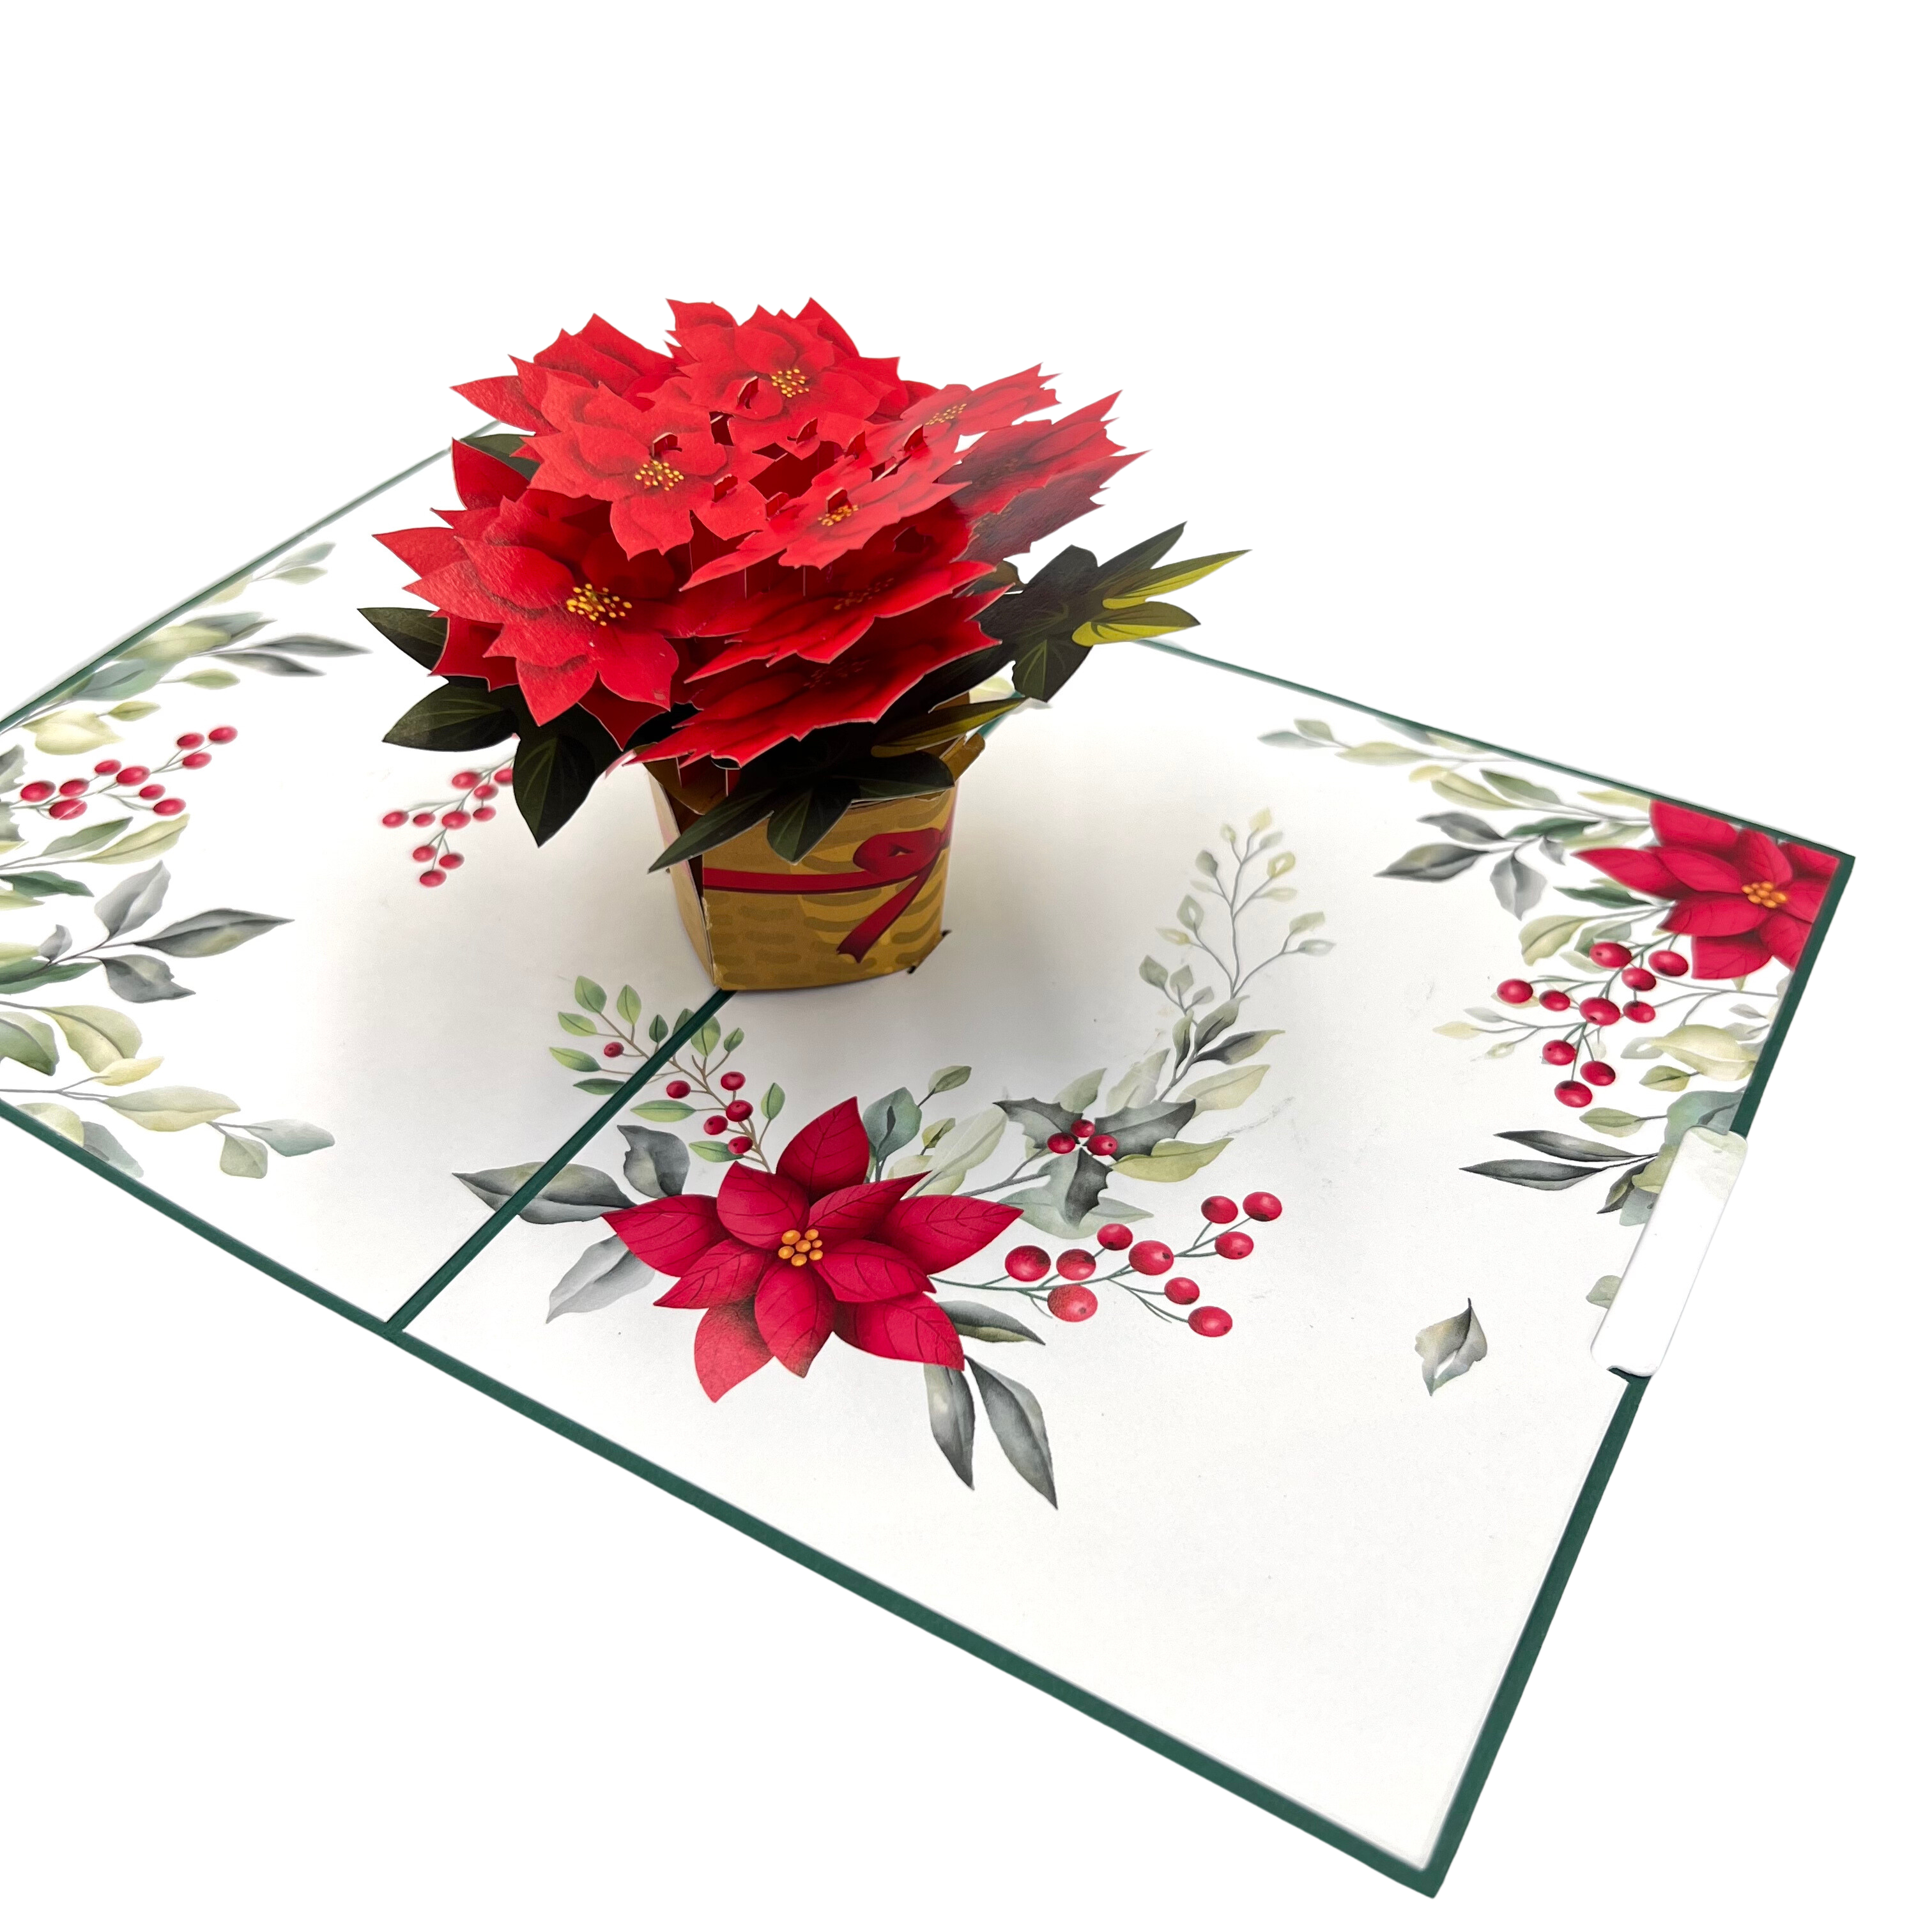 Pop Up Greeting Card Blooming Poinsettia Basket, Thank you Card, Birthday Card, Flower Gift, Nature Card, Christmas Flower, Holiday Card